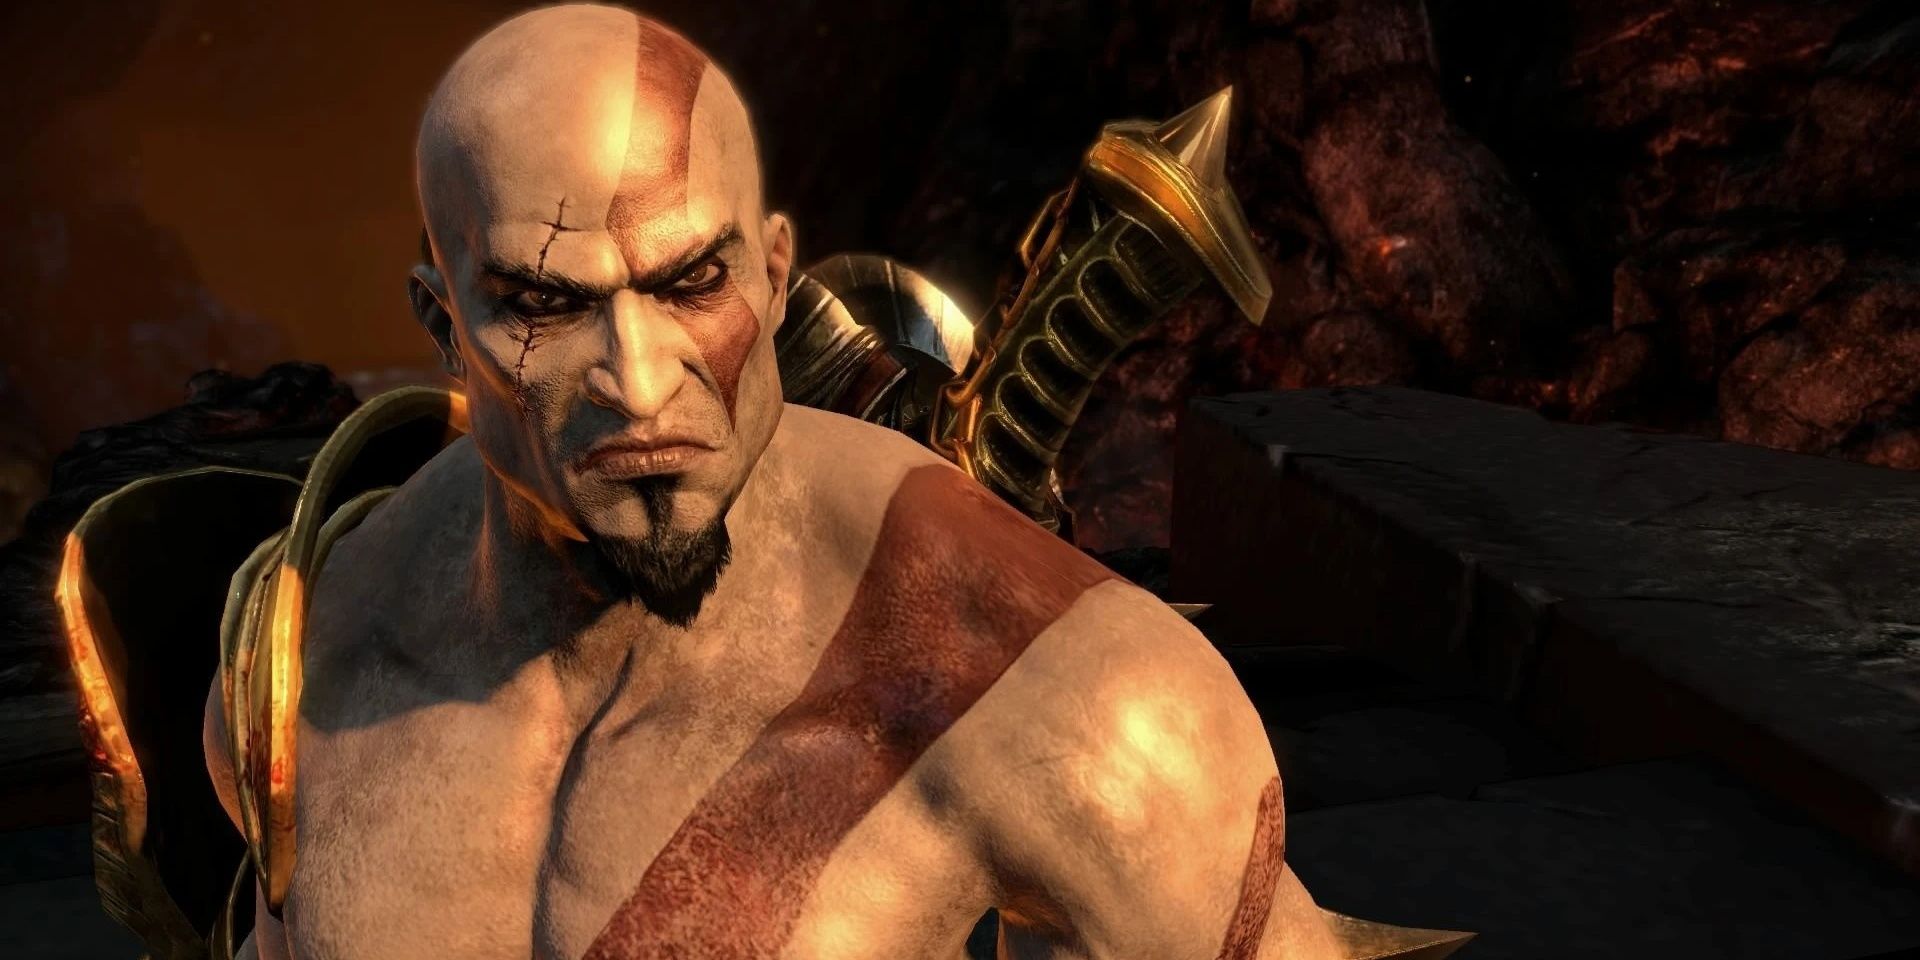 An image of Kratos from God of War 3 staring angrily